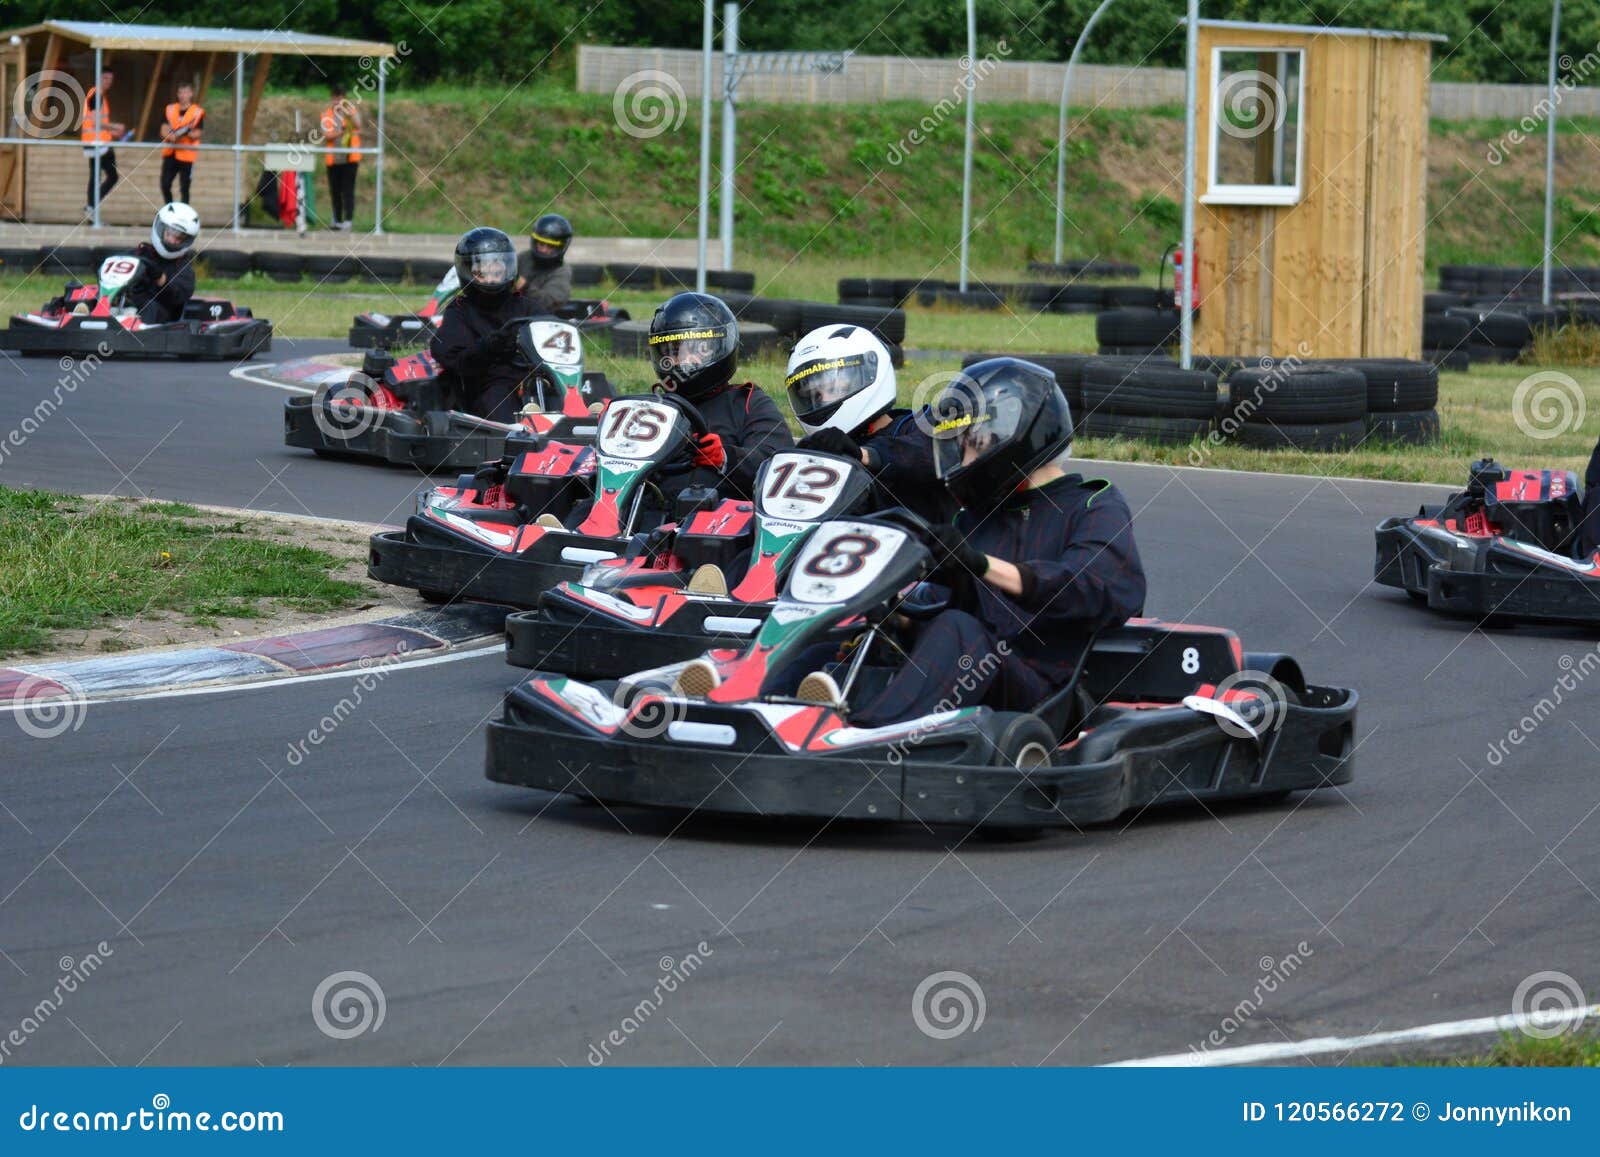 Go Karting Race Editorial Photography Image Of Fighting 120566272